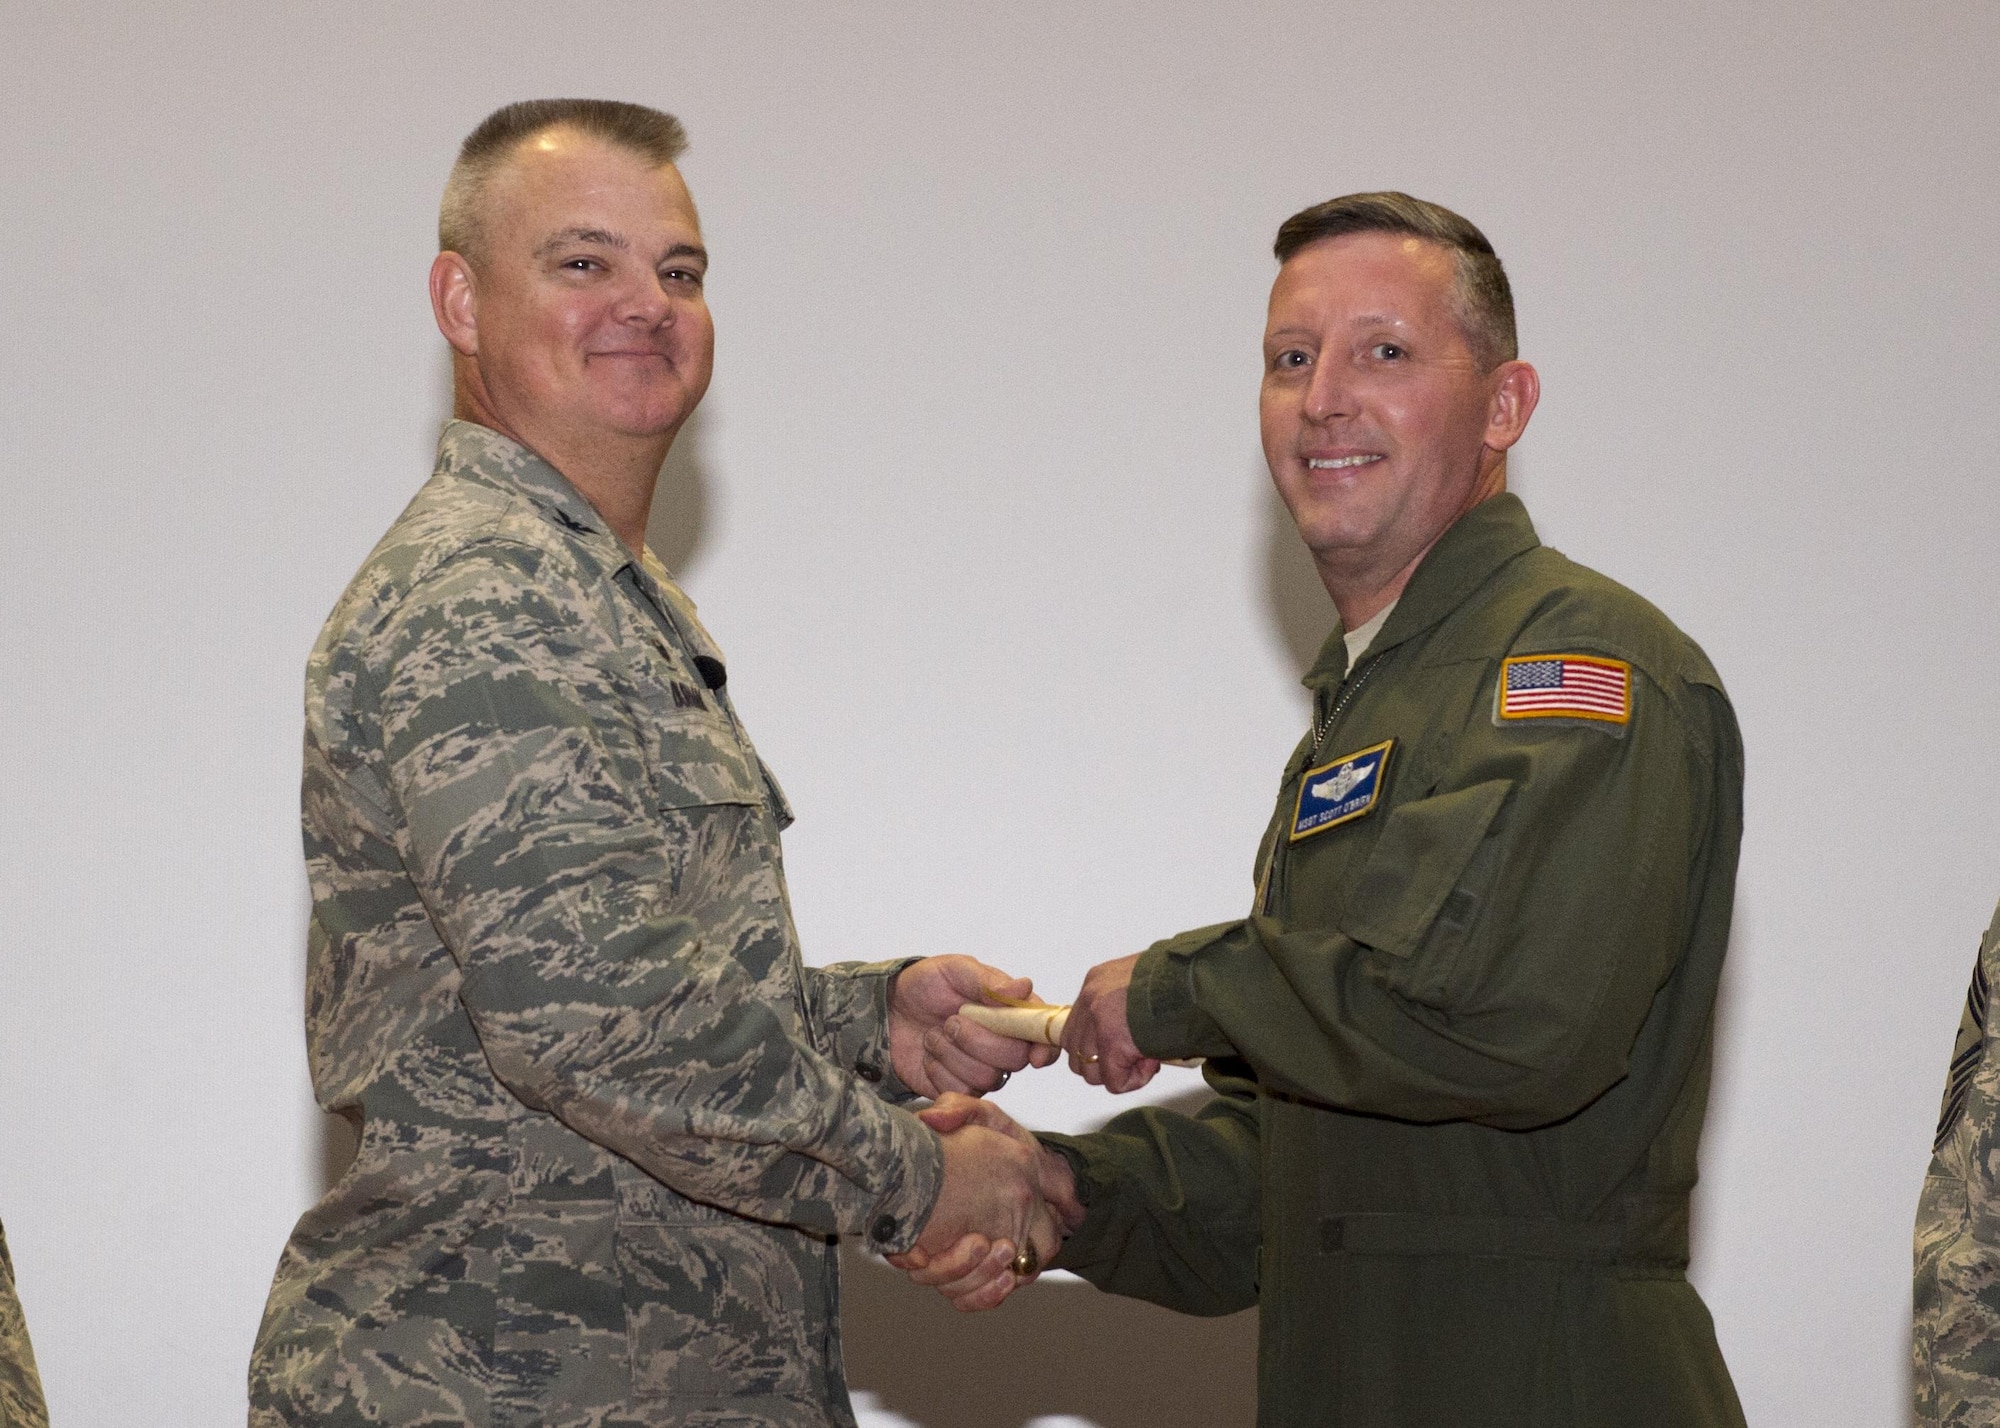 Master Sgt. Scott O’Brien, 709th Airlift Squadron, shakes hands with Col. Scott D. Durham, 512th Airlift Wing commander, during the wing's Community College of the Air Force graduation ceremony, Dec. 3, 2016, Dover Air Force Base, Del. The wing surpassed their goal of awarding 100 CCAF degrees during the year and awarded 109 degrees. (U.S. Air Force Photo/Staff Sgt. Renee Jackson)